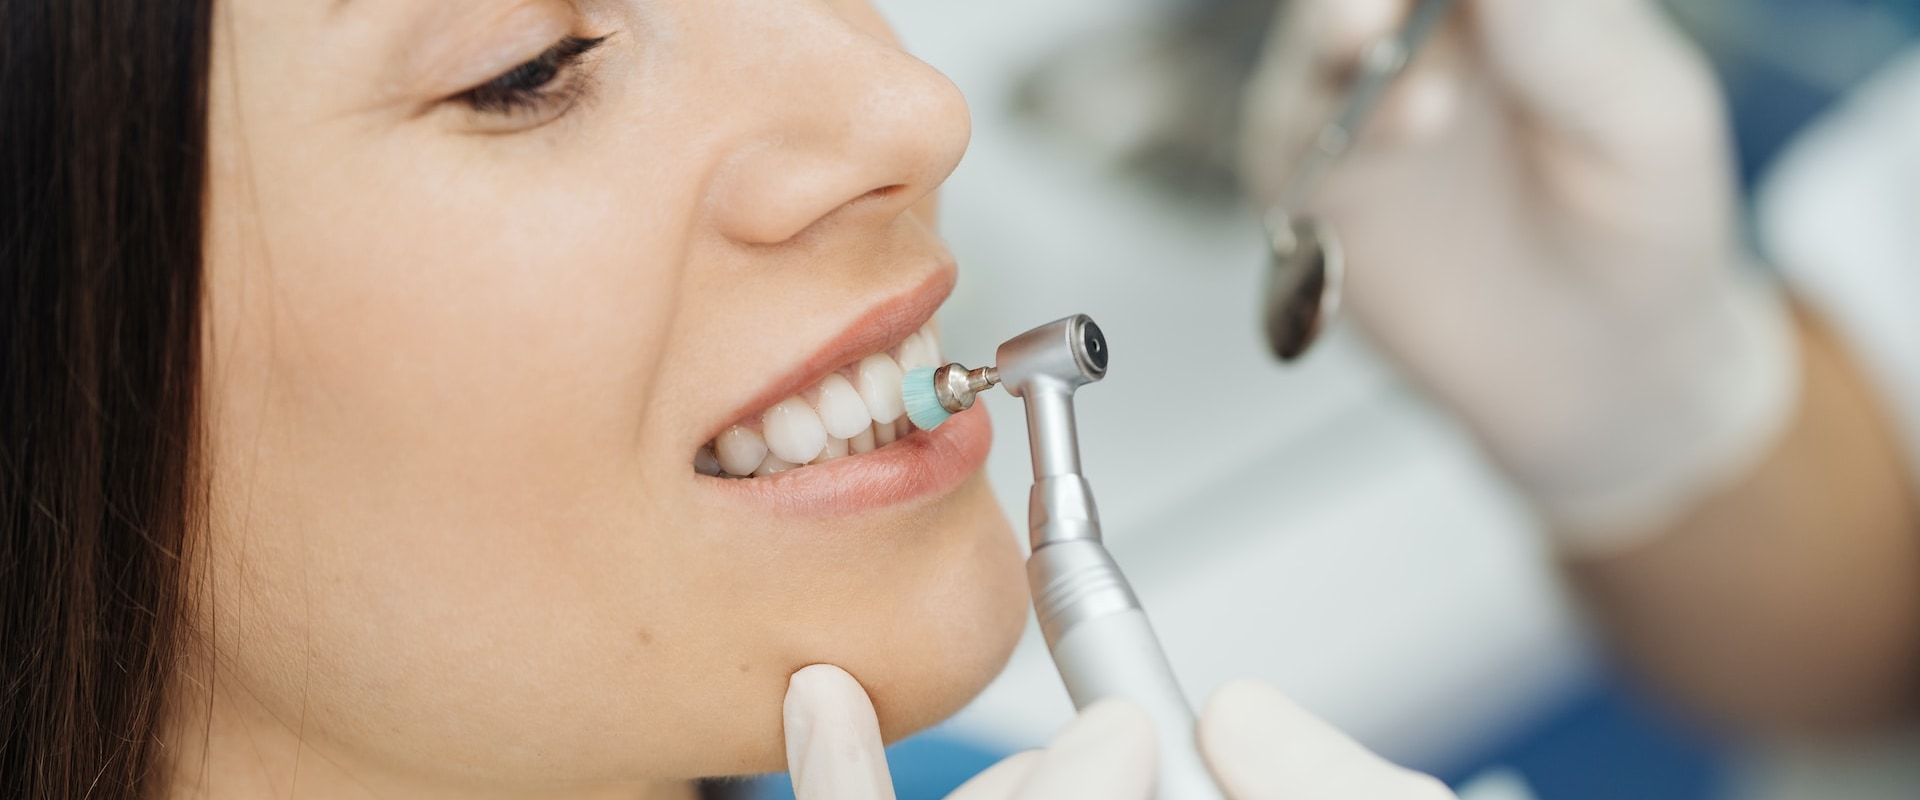 Discussing Goals and Concerns: A Comprehensive Guide to Finding a Cosmetic Dentist